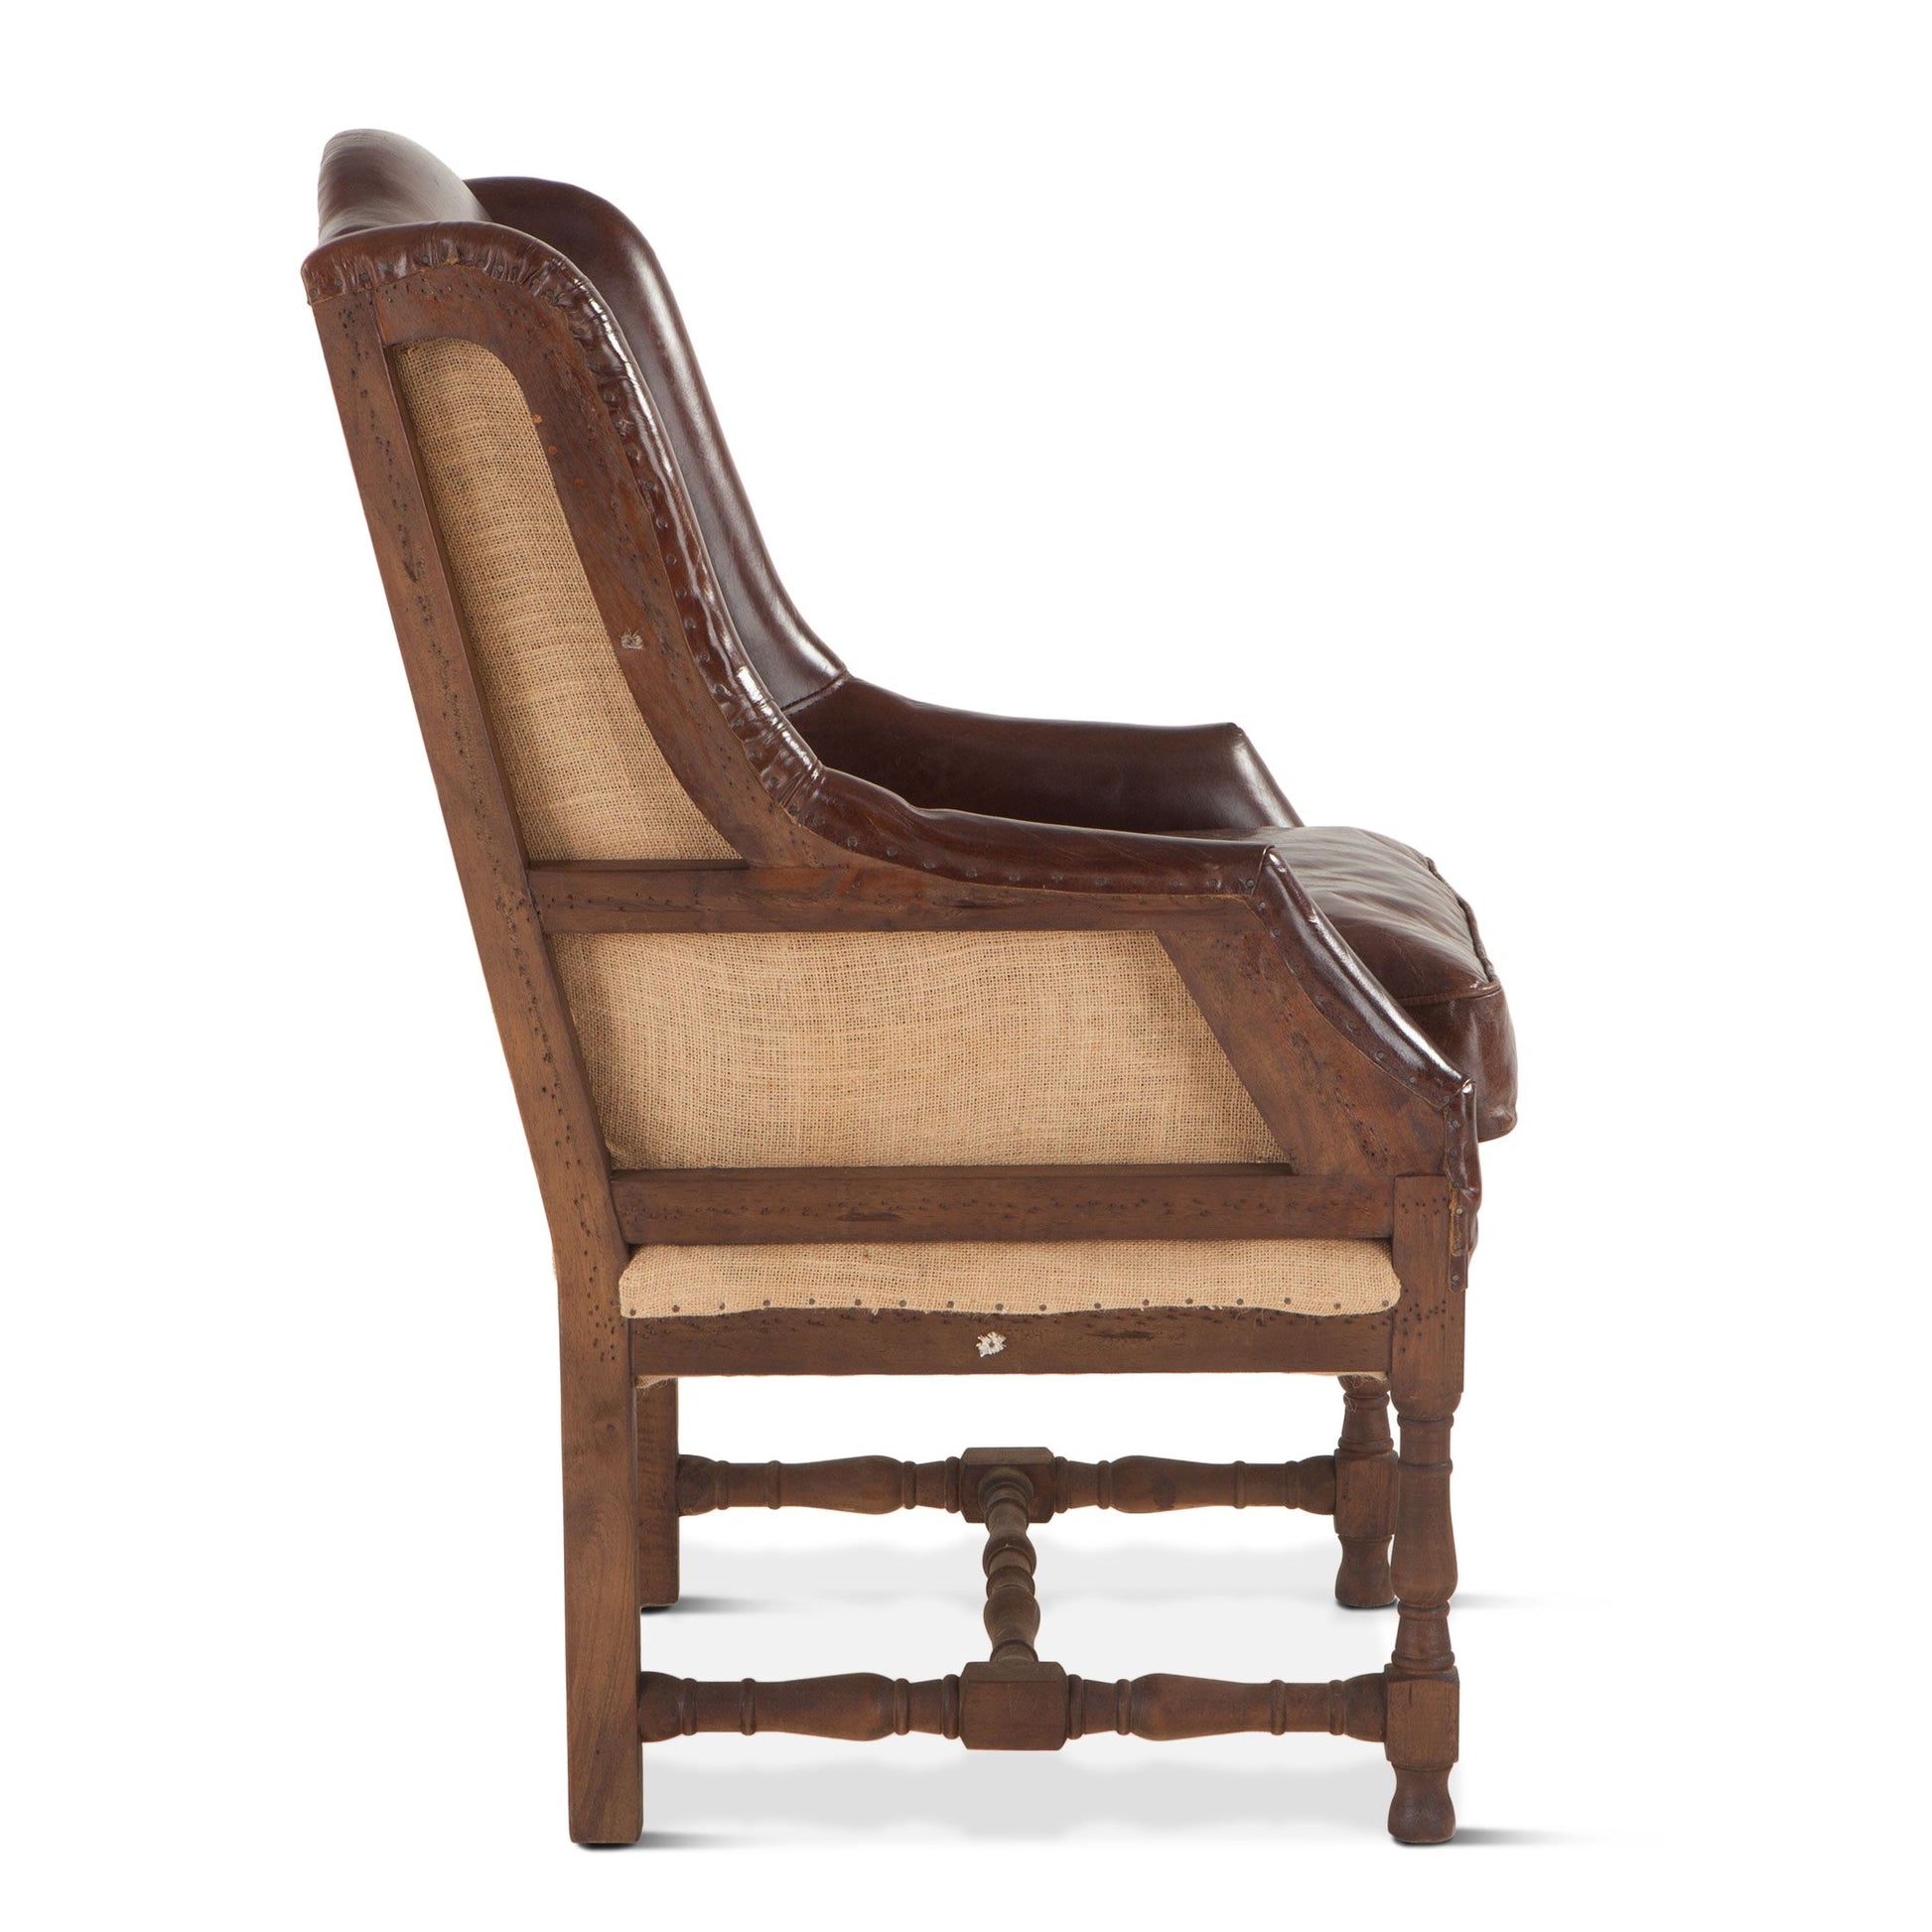 Sicily Deconstructed Armchair with Cigar Leather SKU G205-C30-11